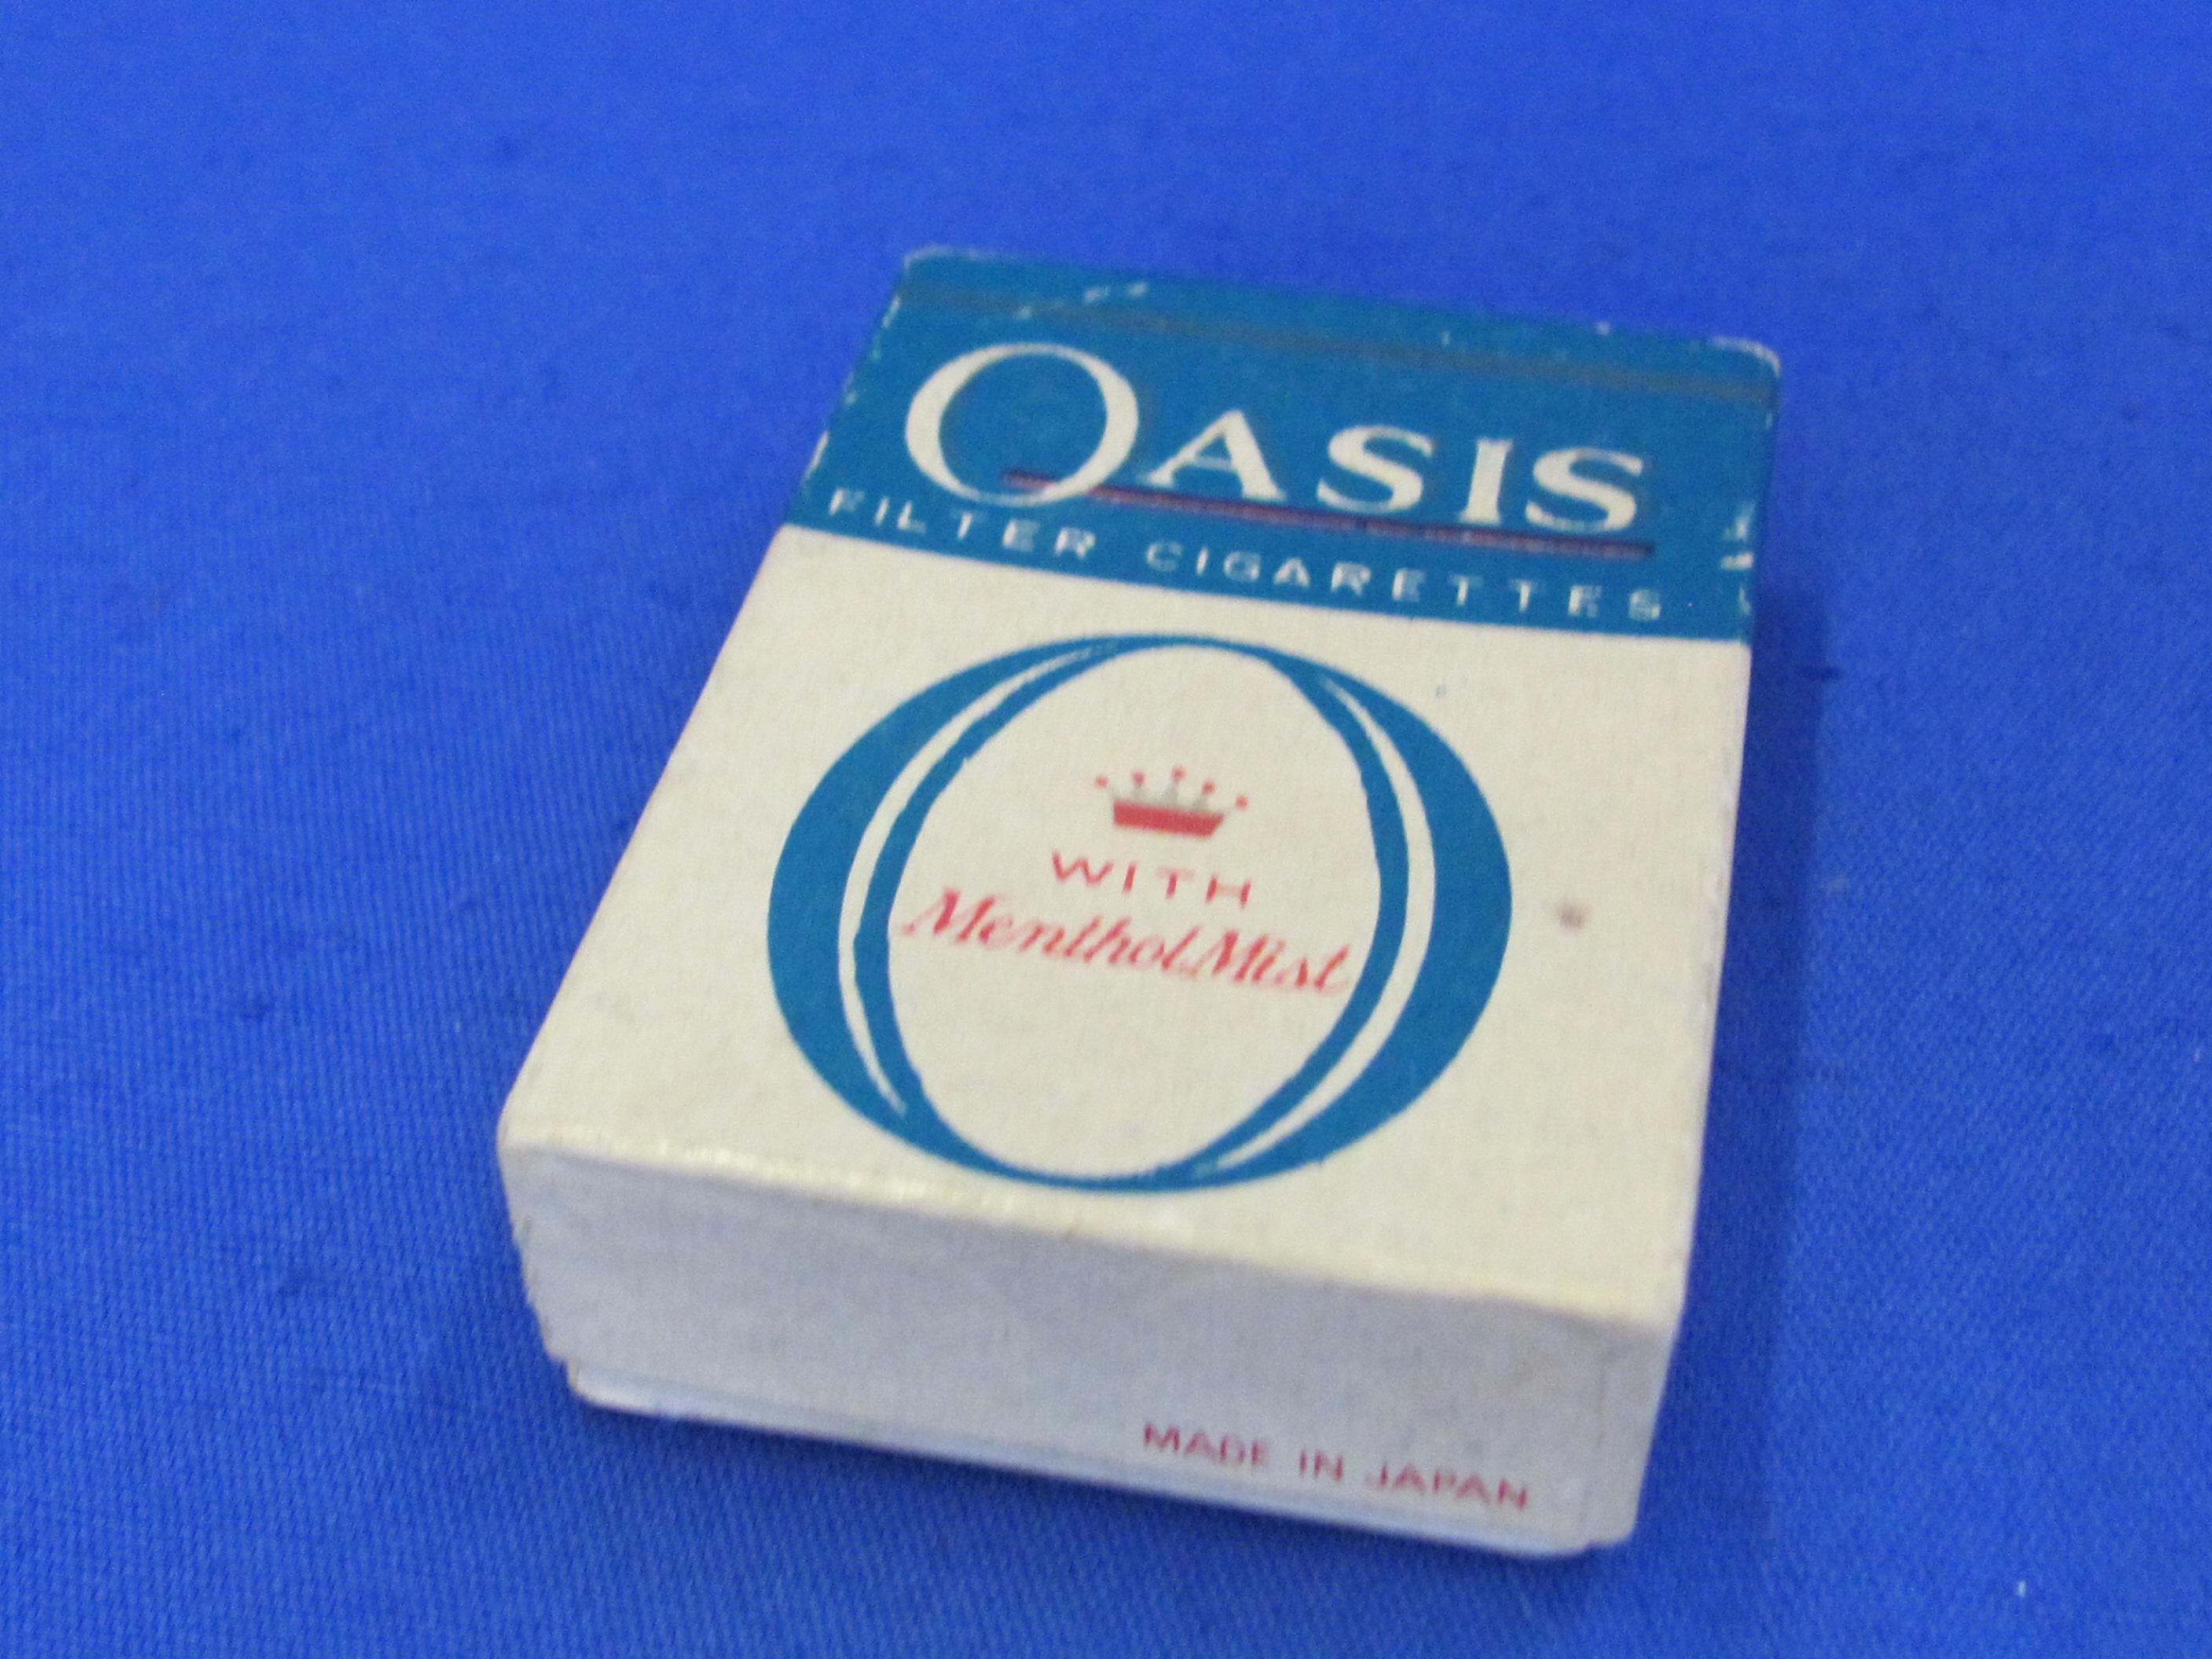 2 Vintage Lighters “Oasis Filter Cigarettes” in Boxes – Continental made in Japan